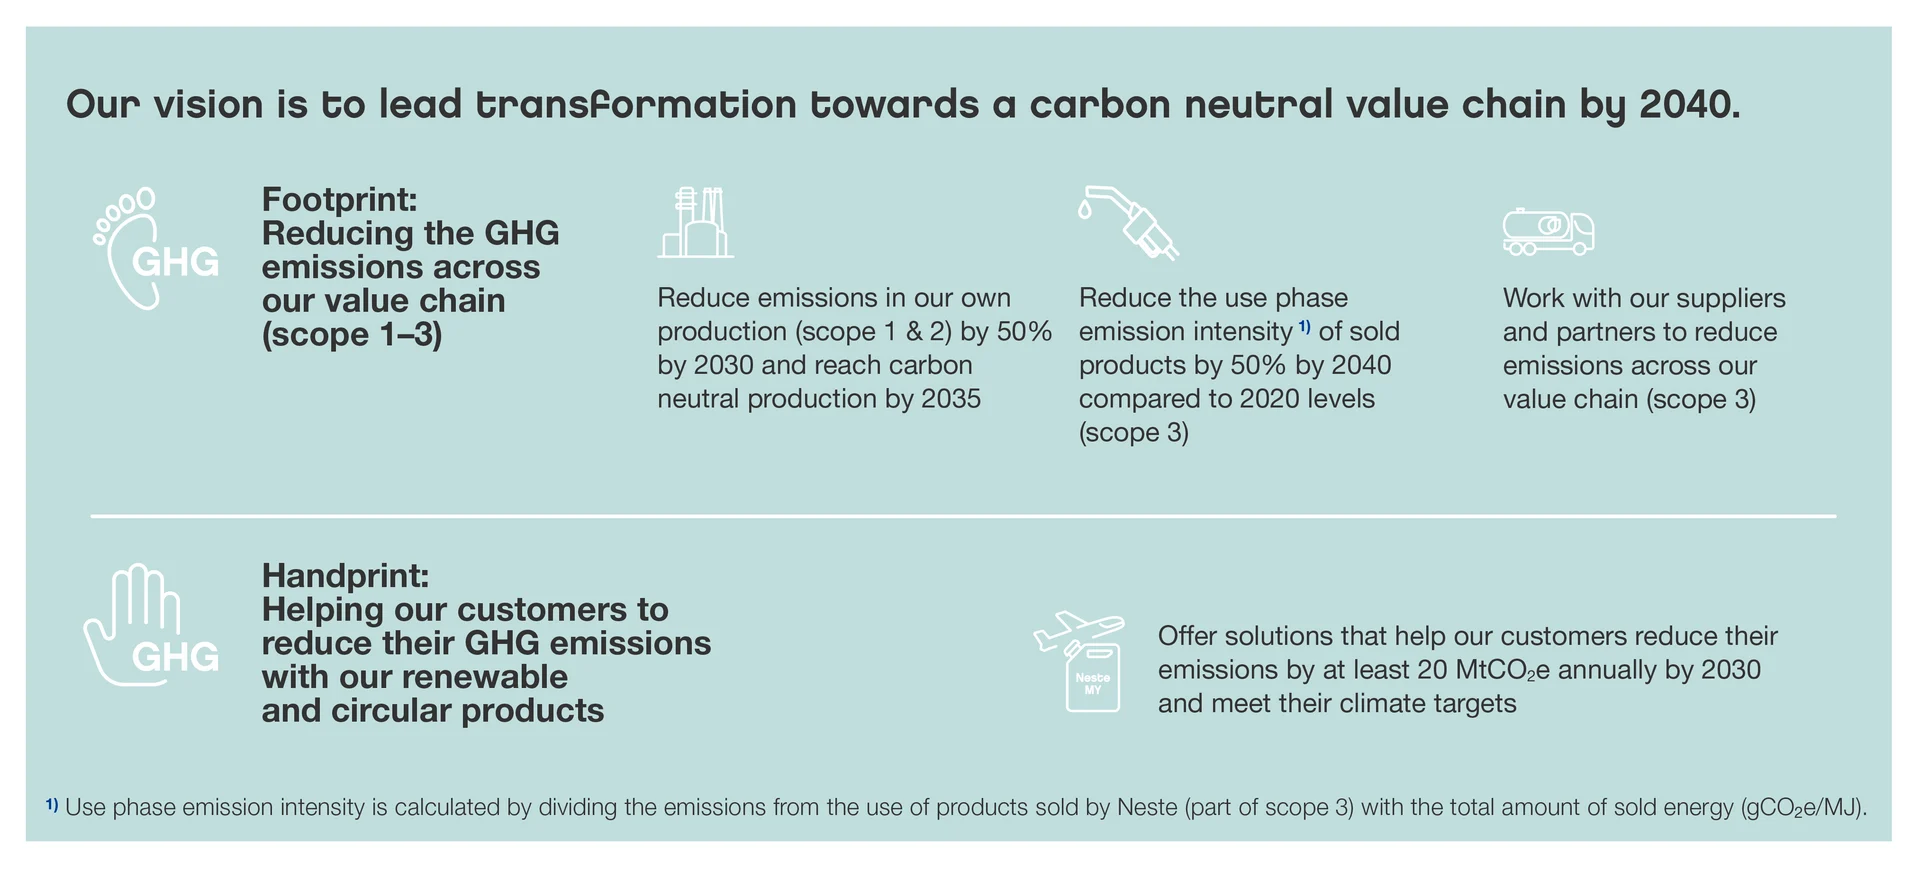 Our vision is to lead transformation towards a carbon neutral value chain by 2040